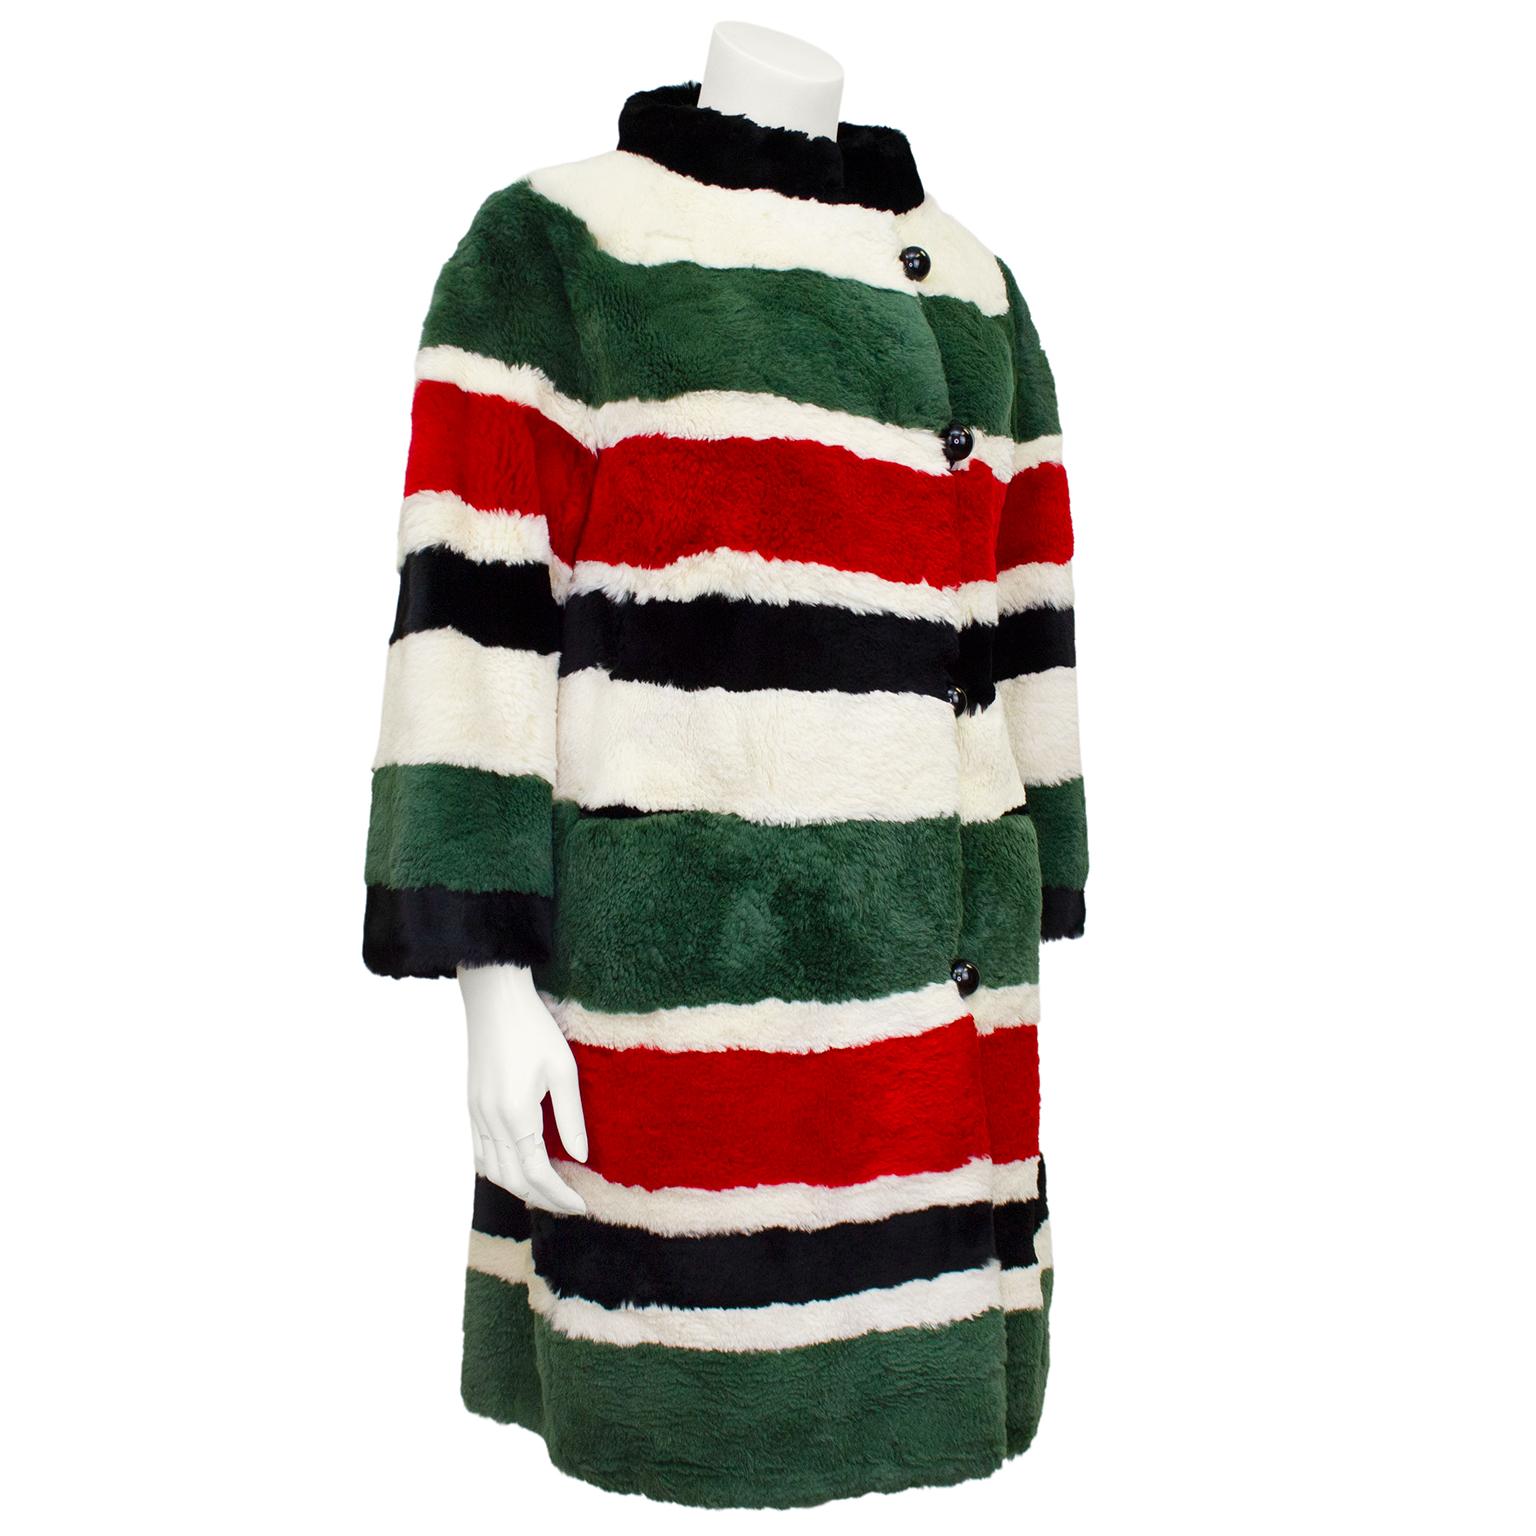 Stunning one-of-a-kind cream, red, green and black sheared beaver mini coat from I Magnin Fur Salon. Dating from 1970’s, perfect for someone looking for an excellent condition whimsical winter coat. Raised collar, stunning oversized black resin ball